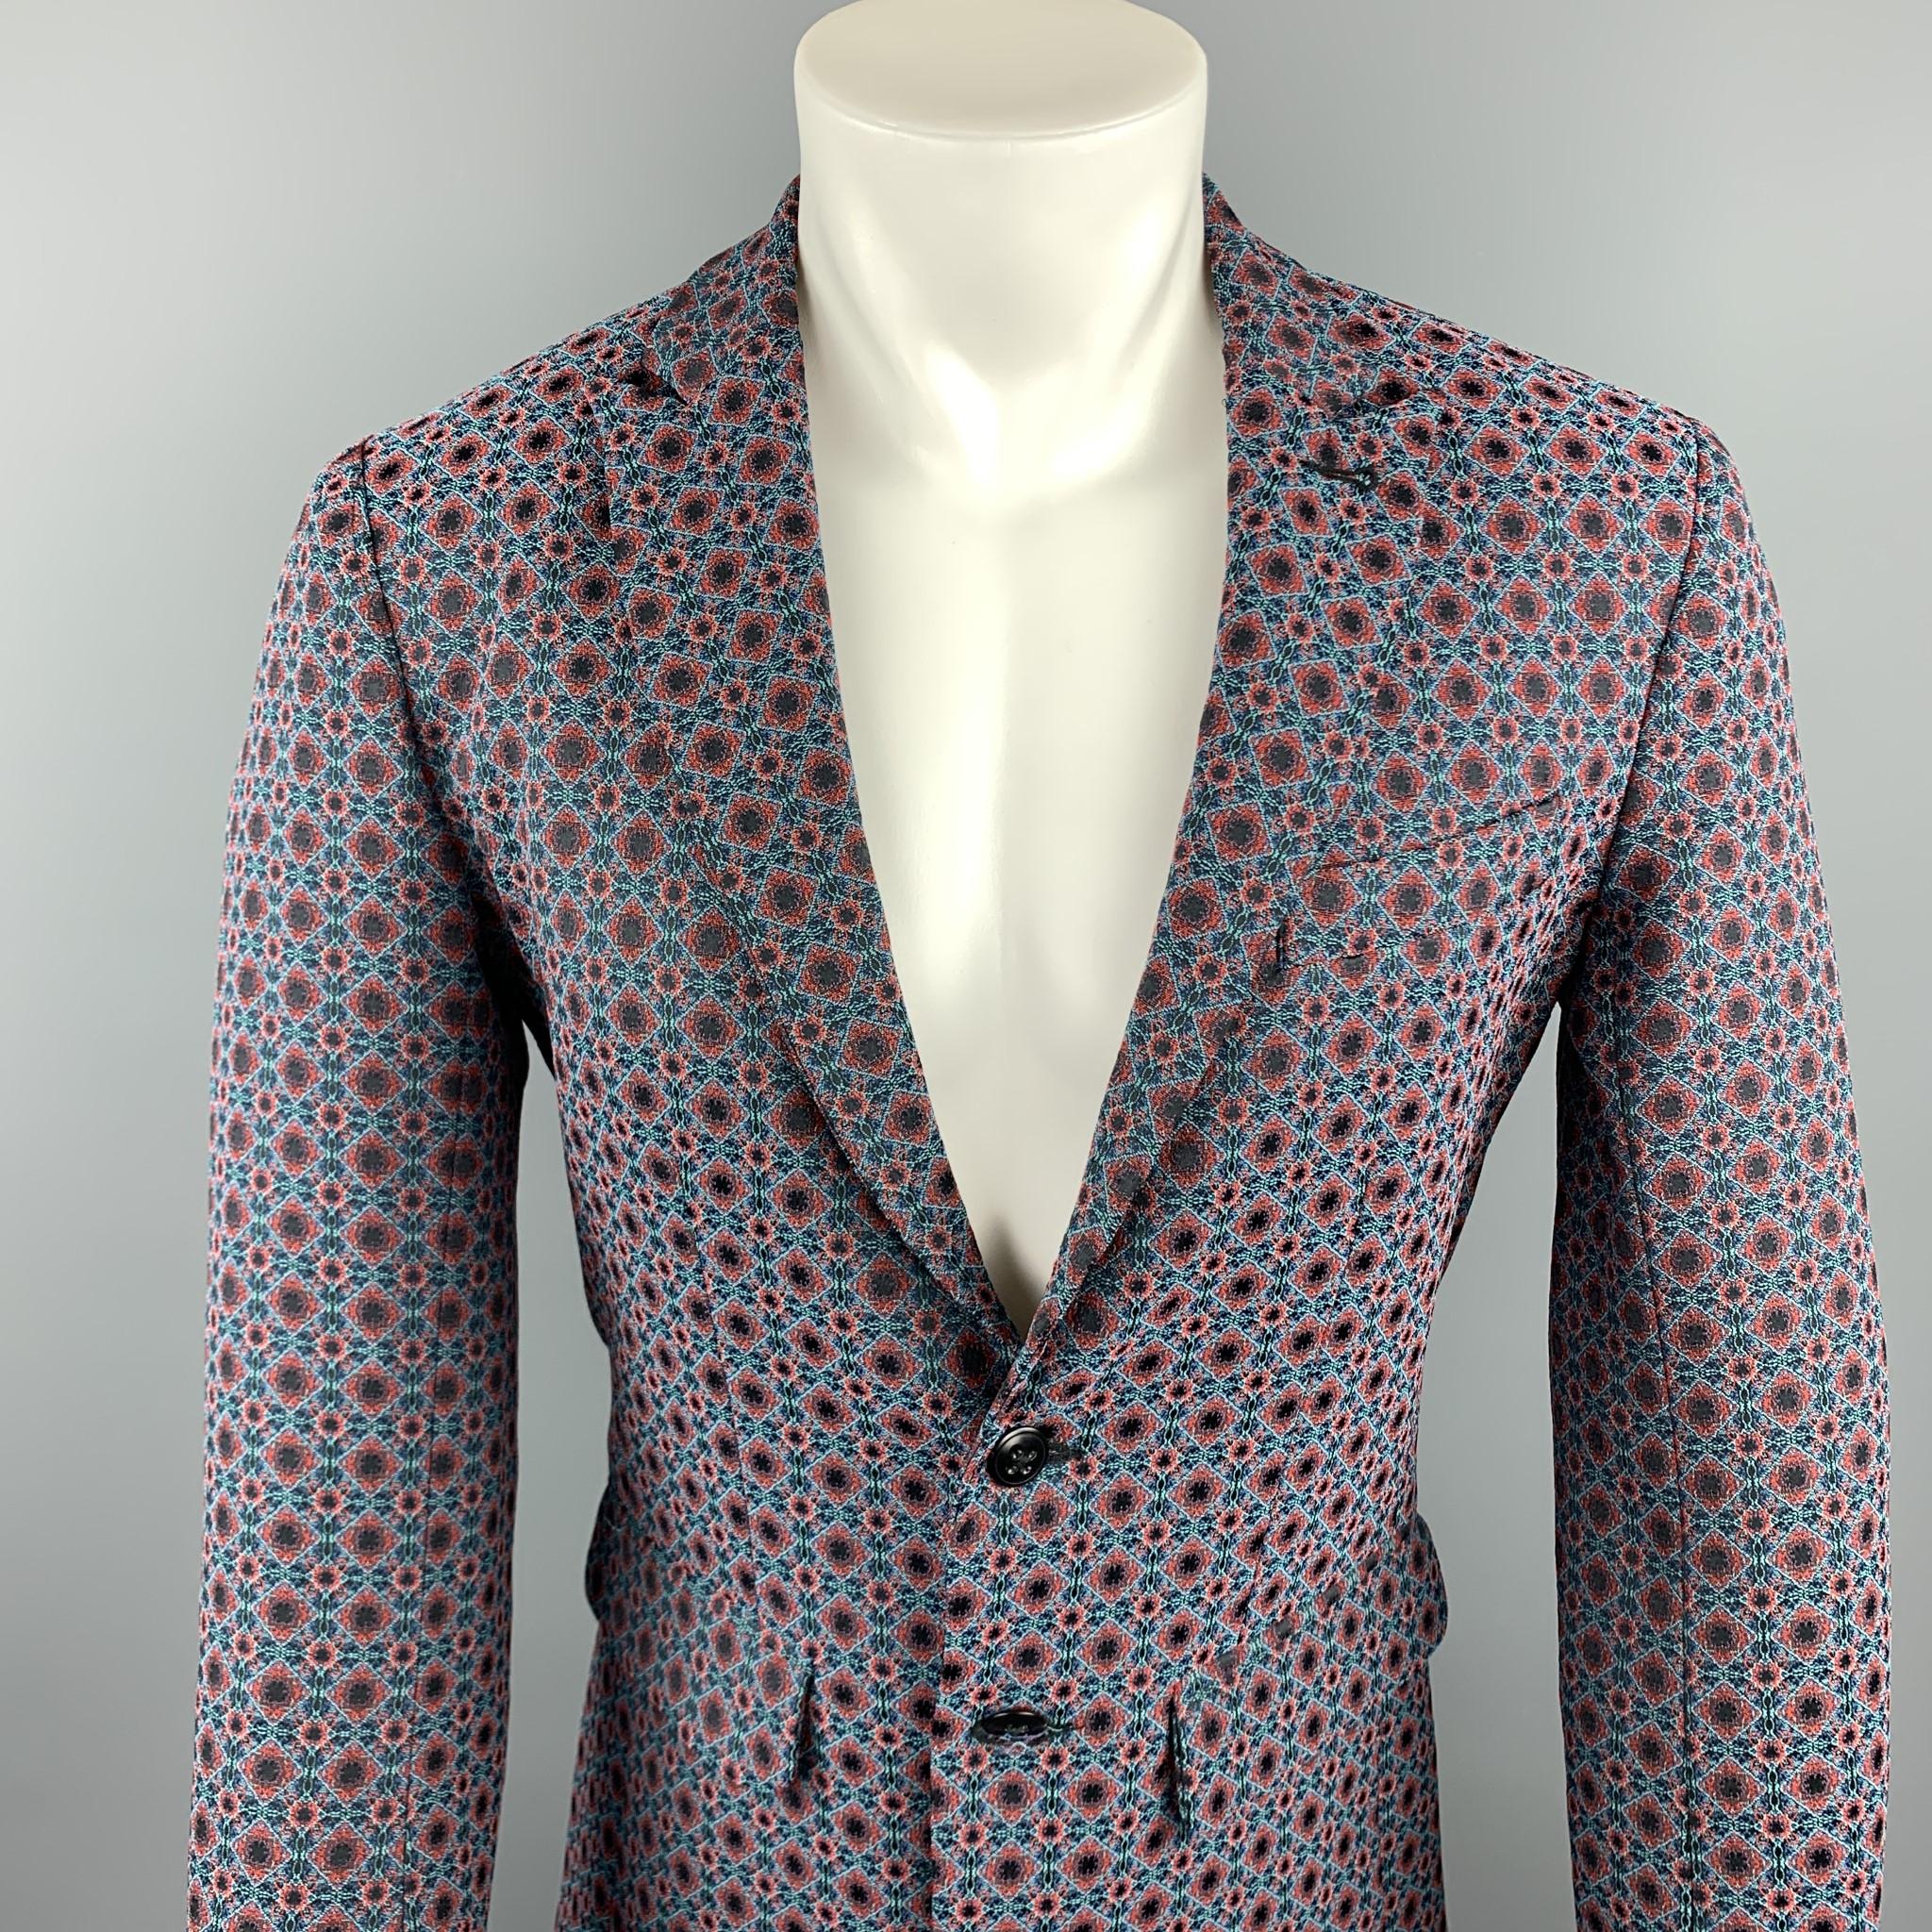 MR.TURK sport coat comes in a blue & red print polyester blend featuring a peak lapel style, flap pockets, and a two button closure. Made in USA.

New With Tags.
Marked: 36

Measurements:

Shoulder: 16.5 in.
Chest: 36 in. 
Sleeve: 25.5 in. 
Length: